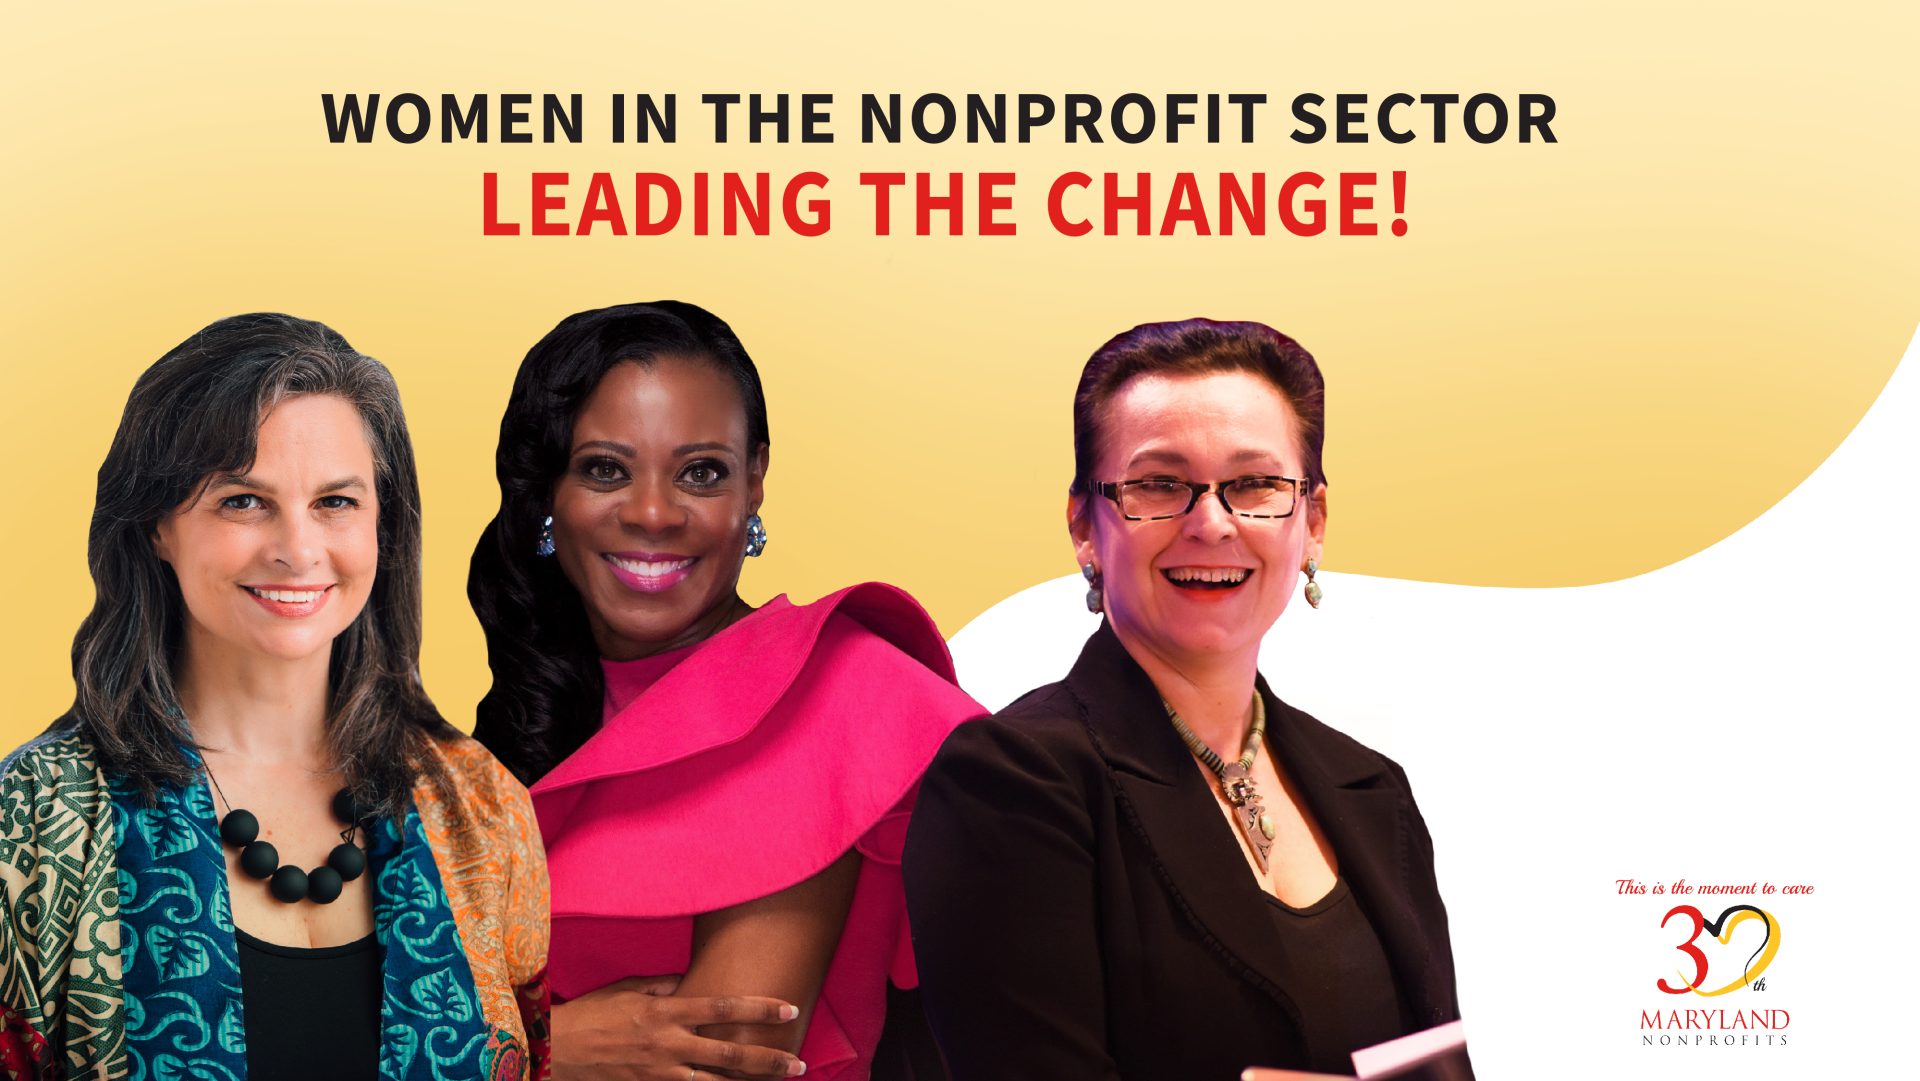 Women in the nonproft sector leading the change